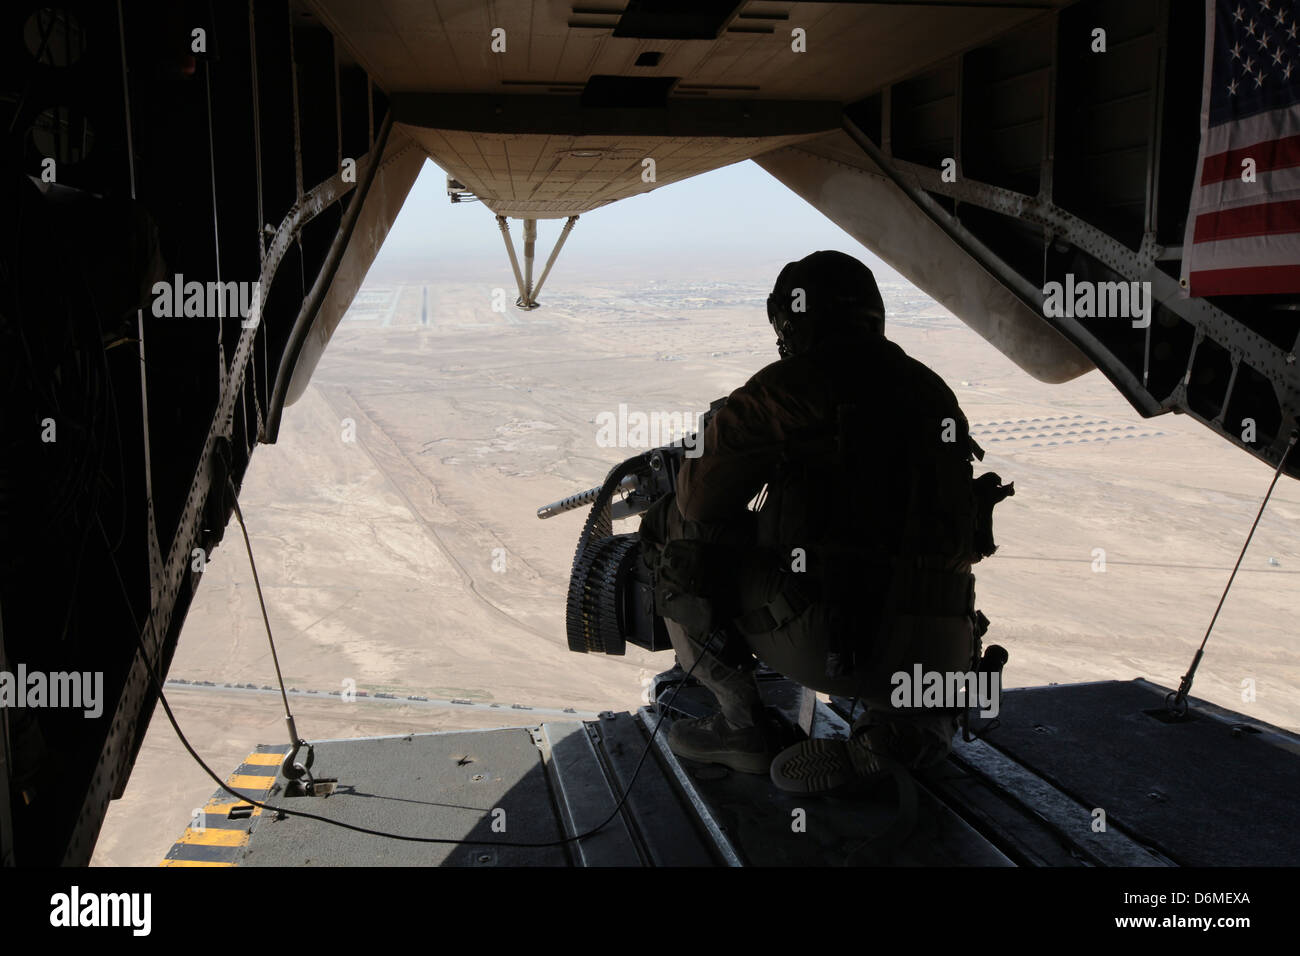 A US Marine door gunner provides security from a CH-53E Super Stallion helicopter during operations April 10, 2013 in Helmand province, Afghanistan. Stock Photo